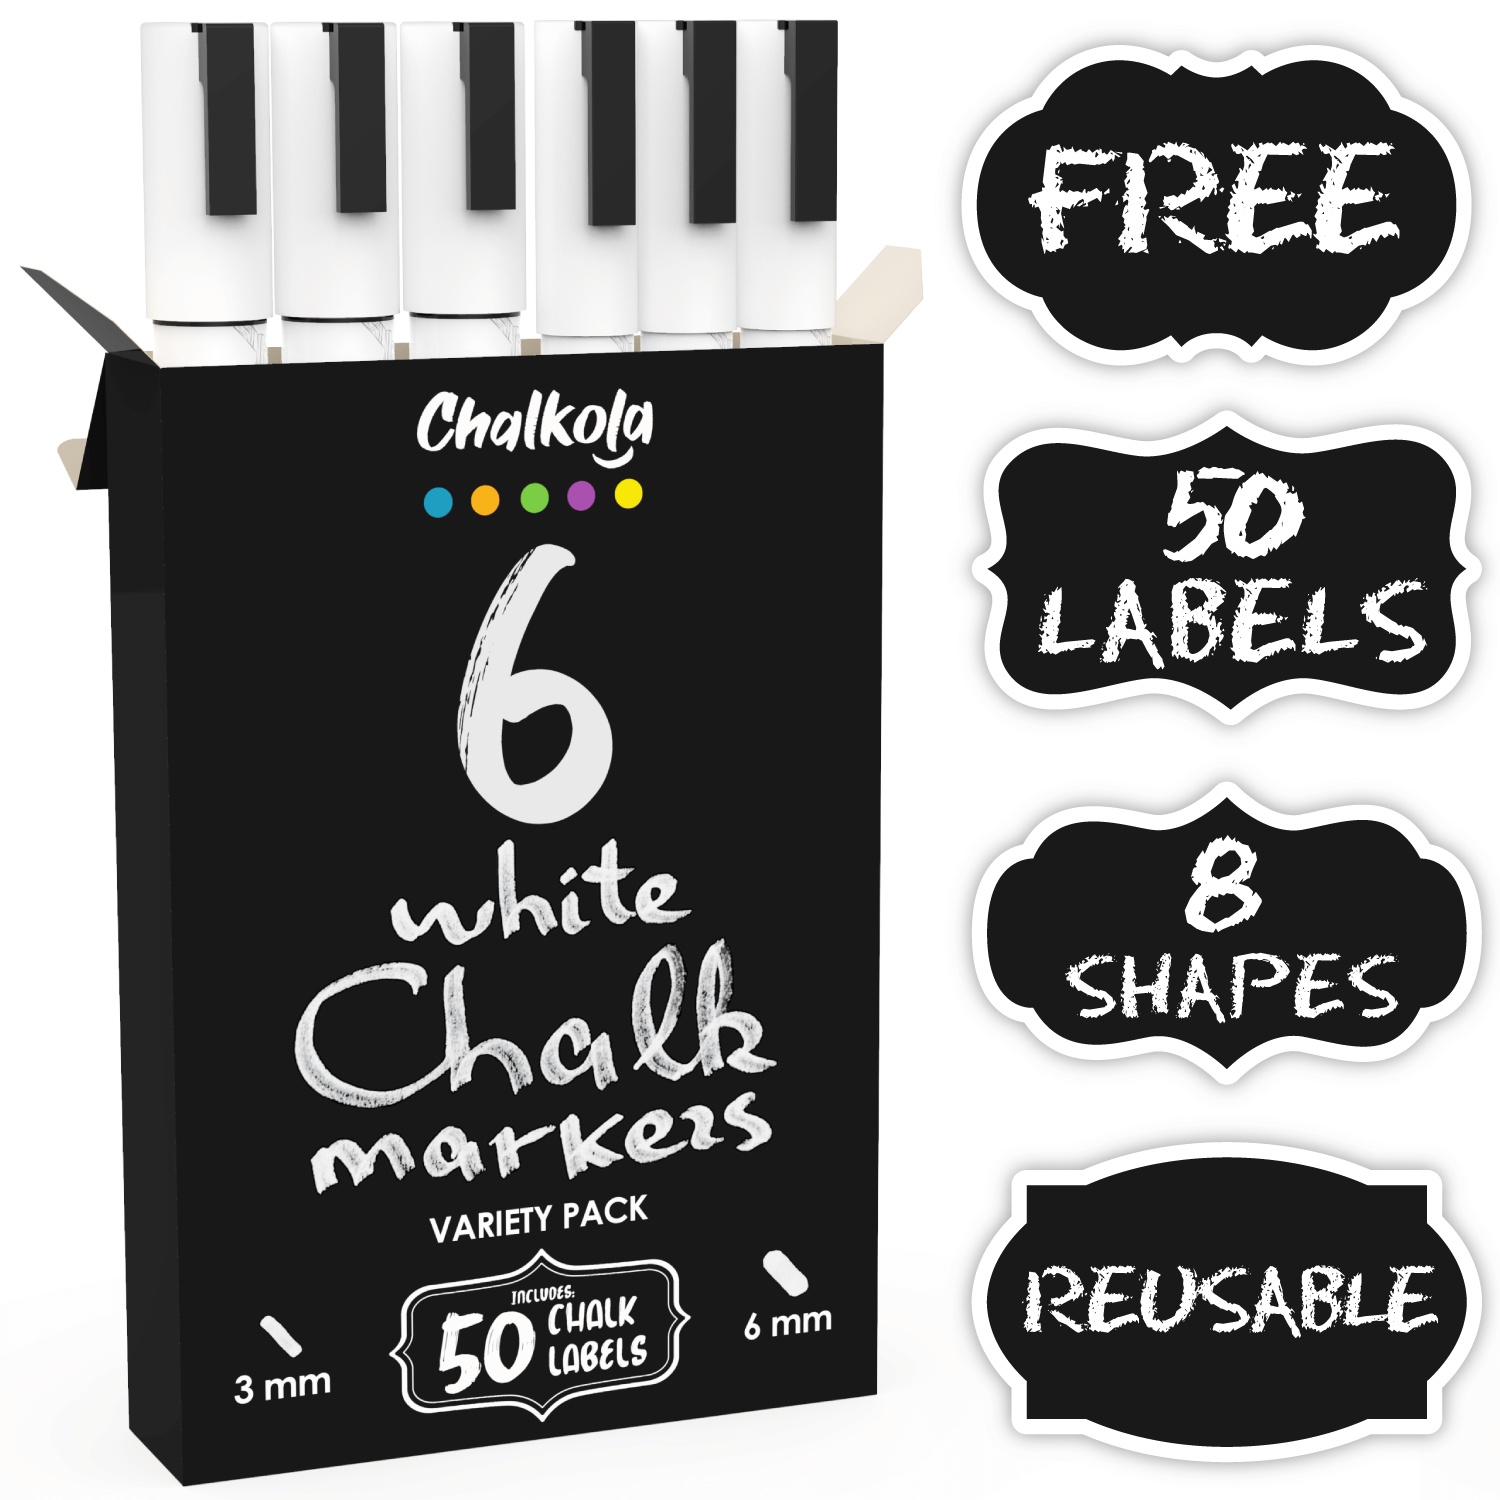 Funcils White Chalk Markers for Chalkboard Signs, Blackboard, Window,  Labels, Bistro, Glass, Cars - Variety Pack of 6 - (2x) 1mm Extra Fine, 3mm  Fine Tip & 6mm Bold Tip